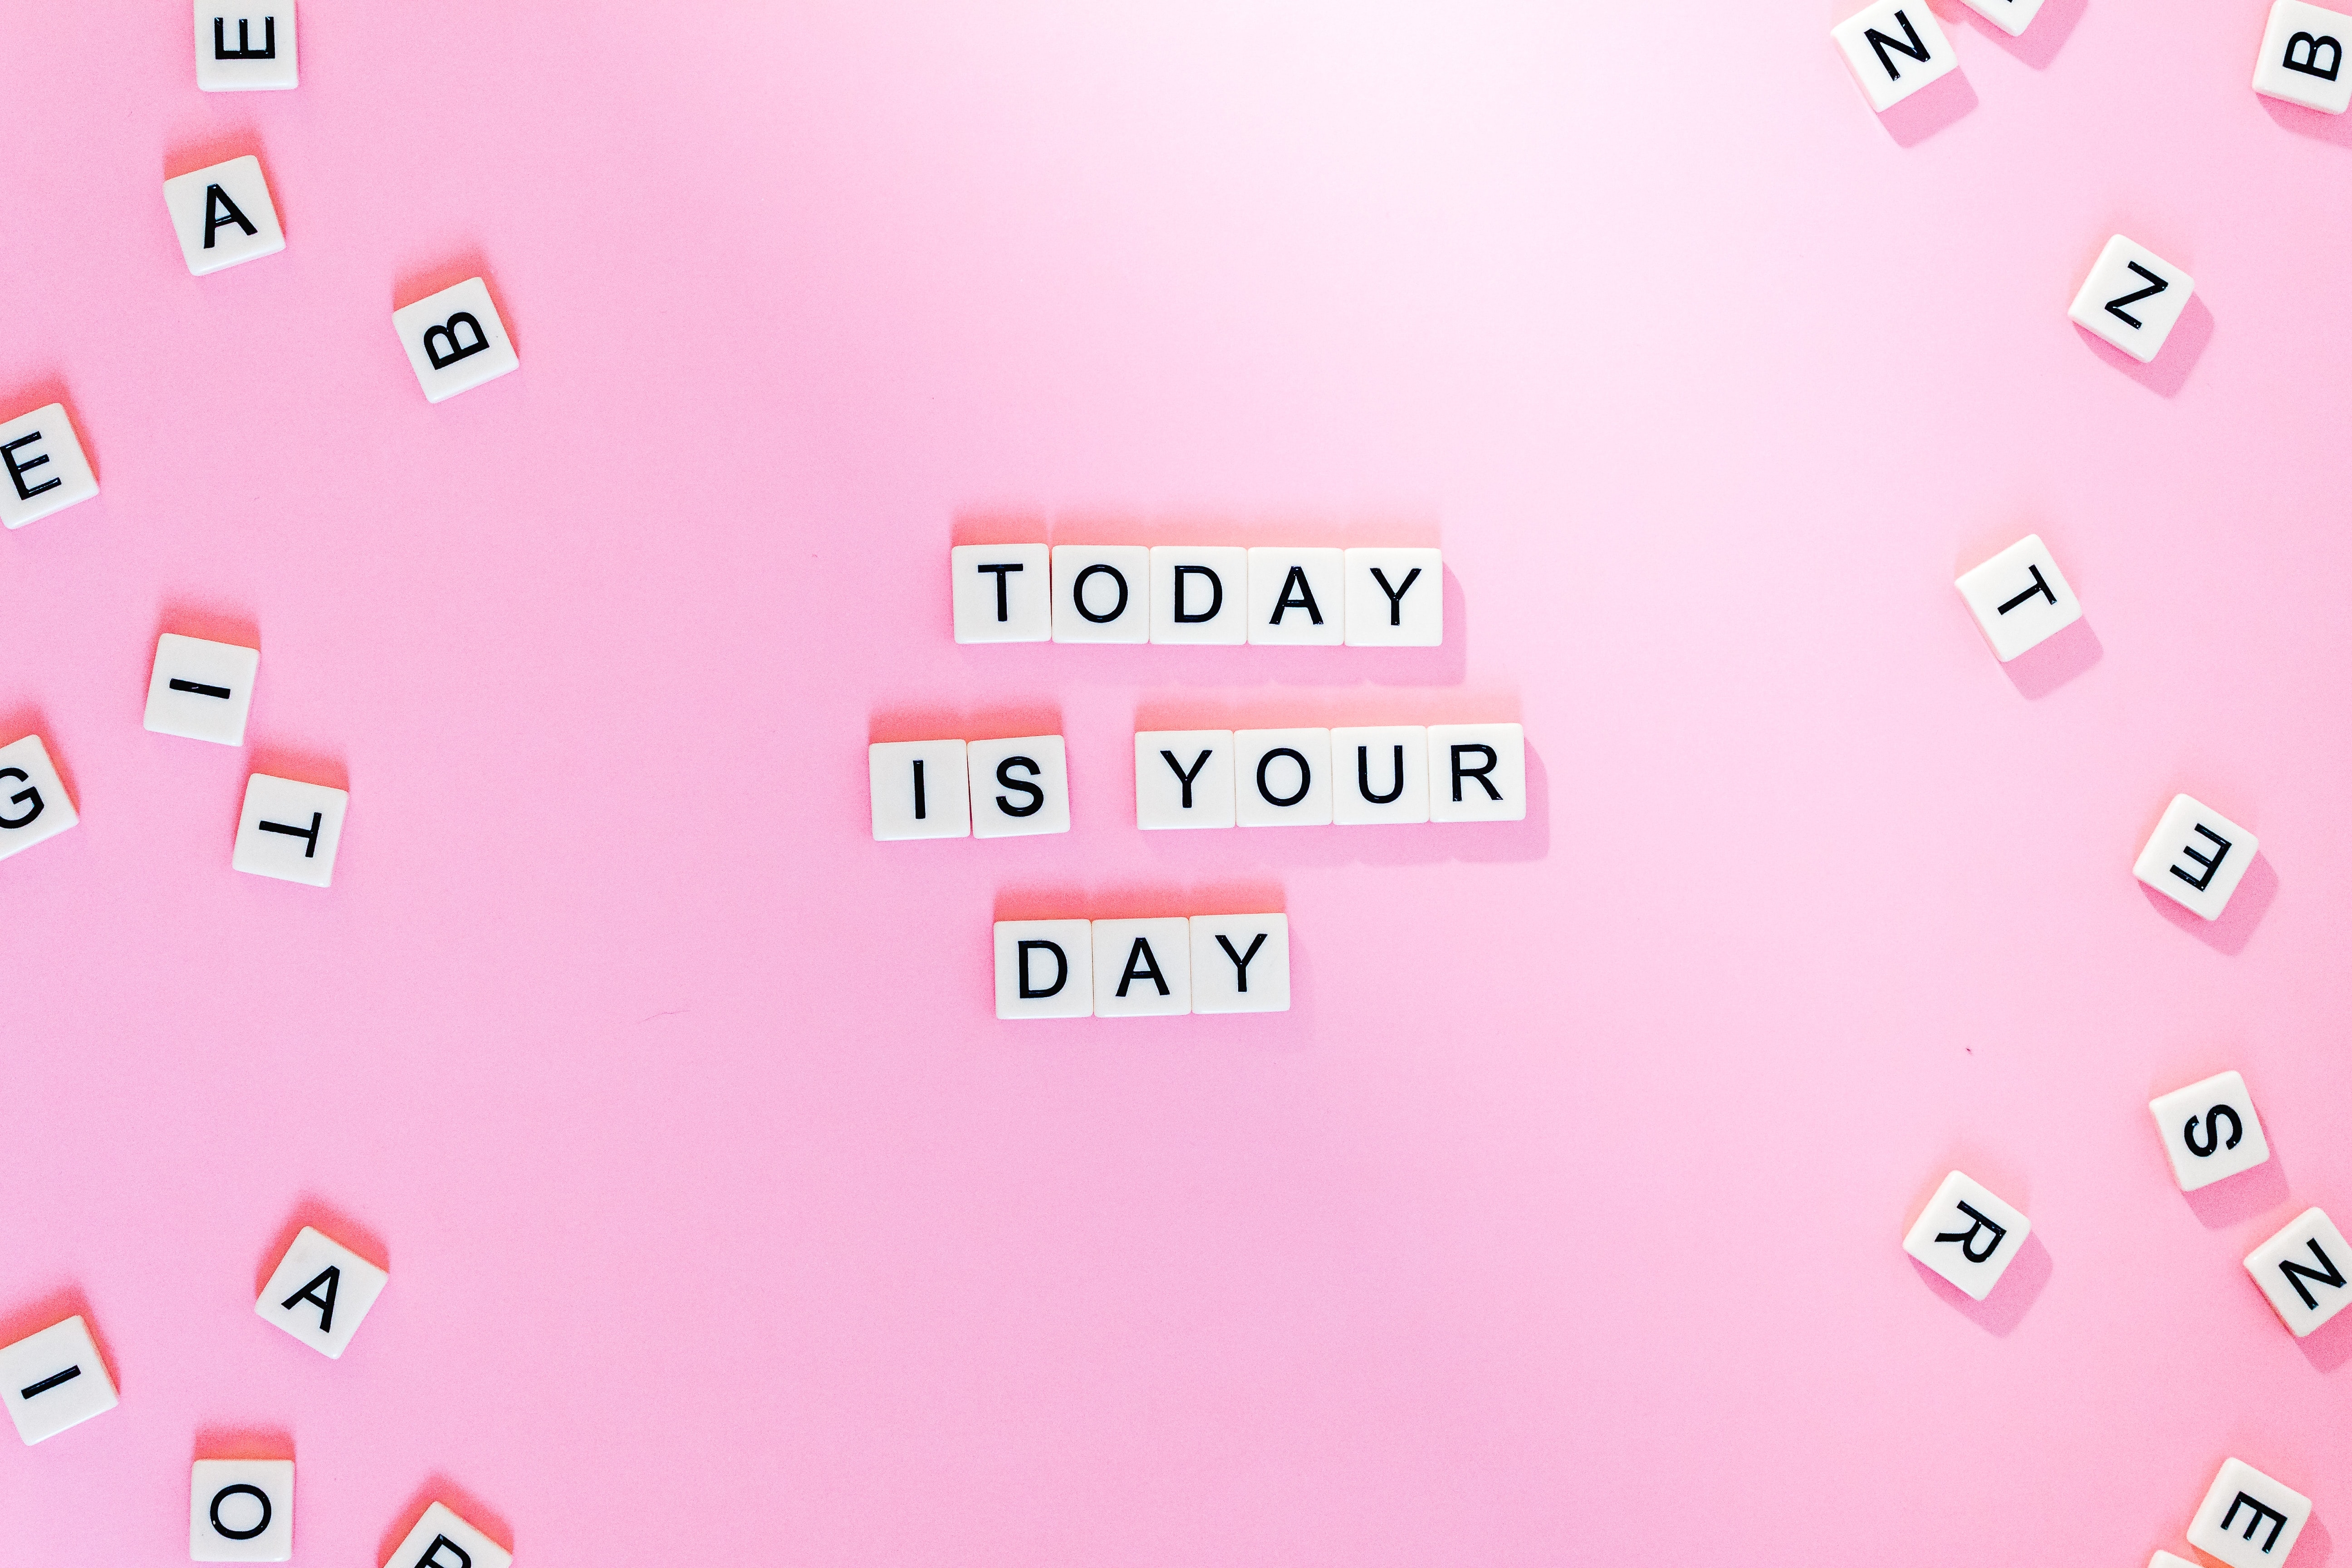 HD wallpaper, Letters, Motivational, Pastel Background, Aesthetic, 5K, Popular Quotes, Today Is Your Day, Pink Background, Girly, Pastel Pink